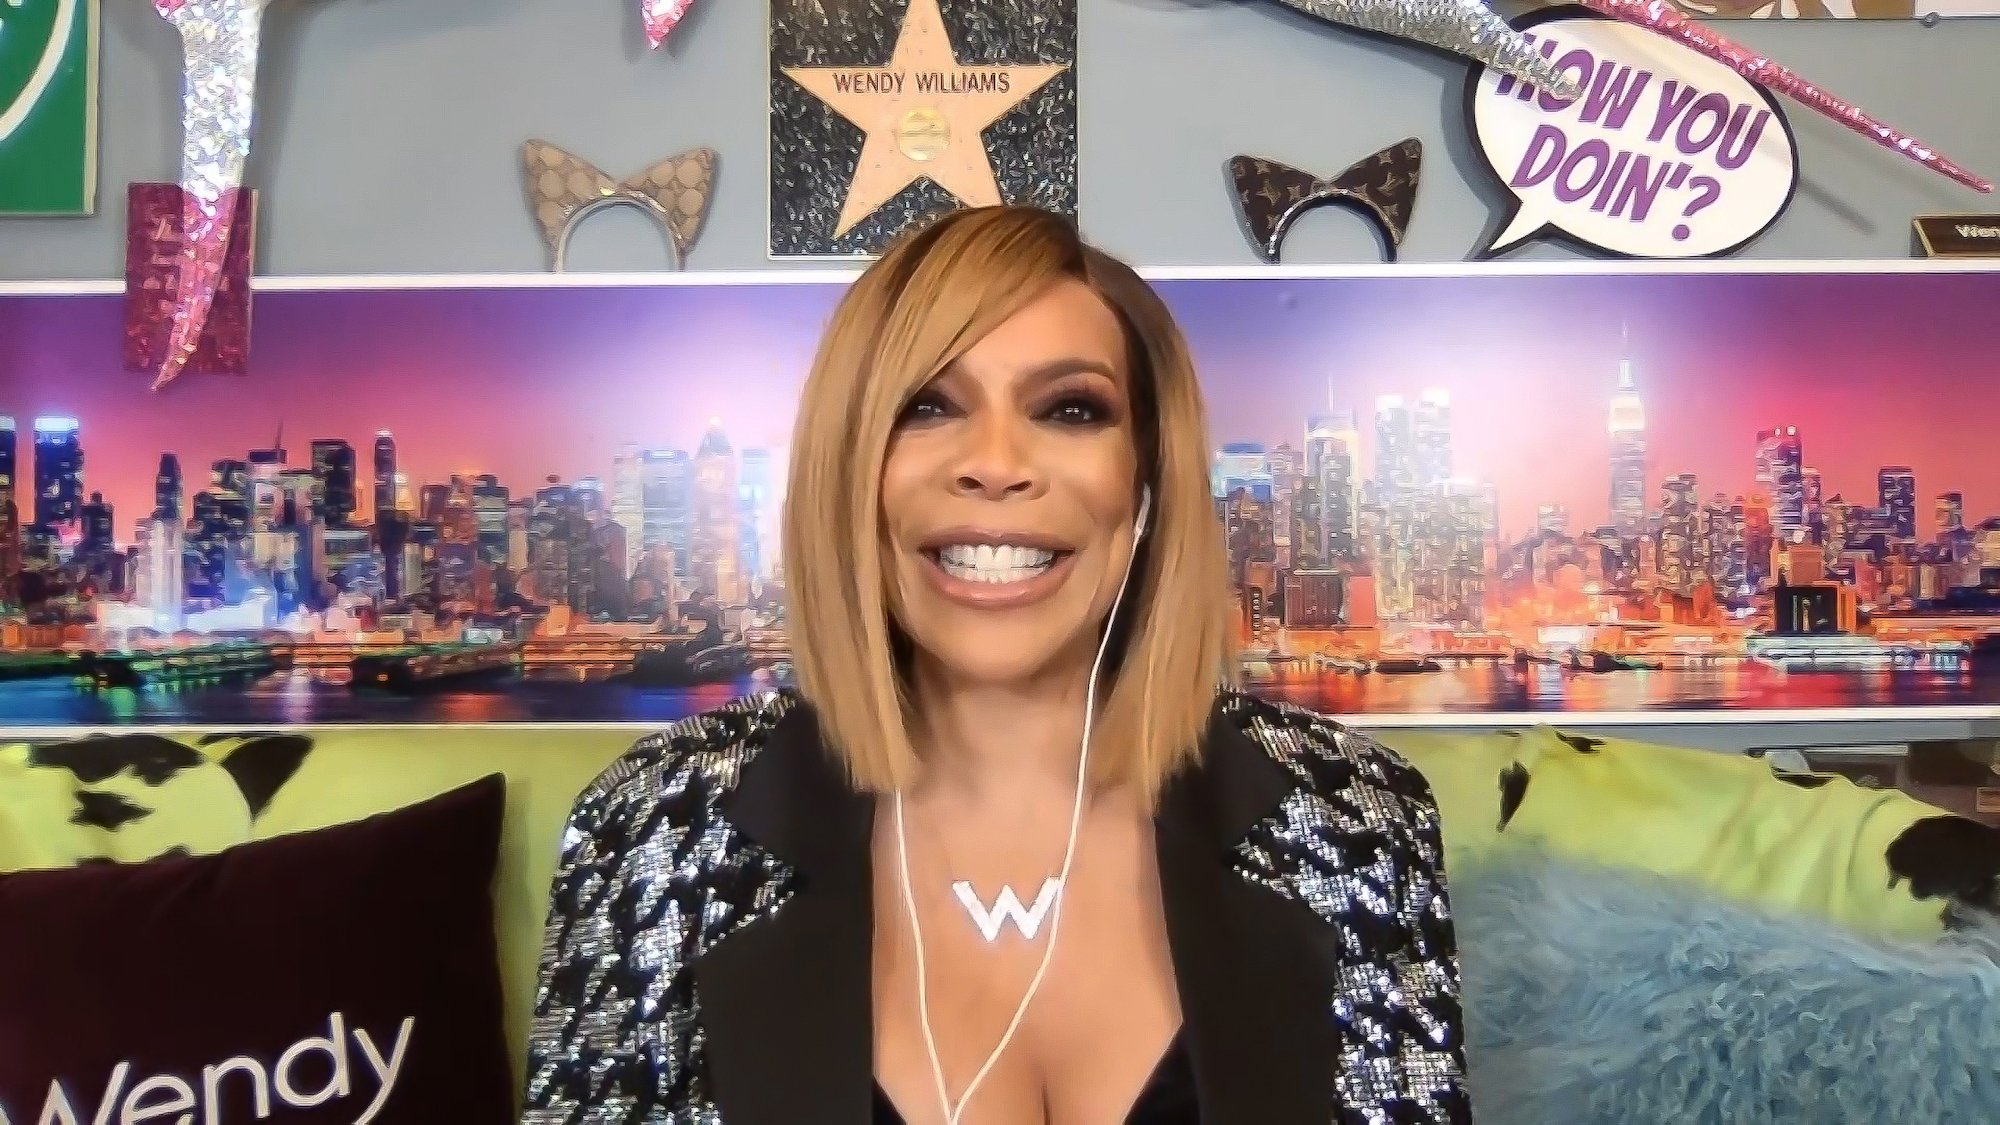 Wendy Williams smiling on the set of her talk show